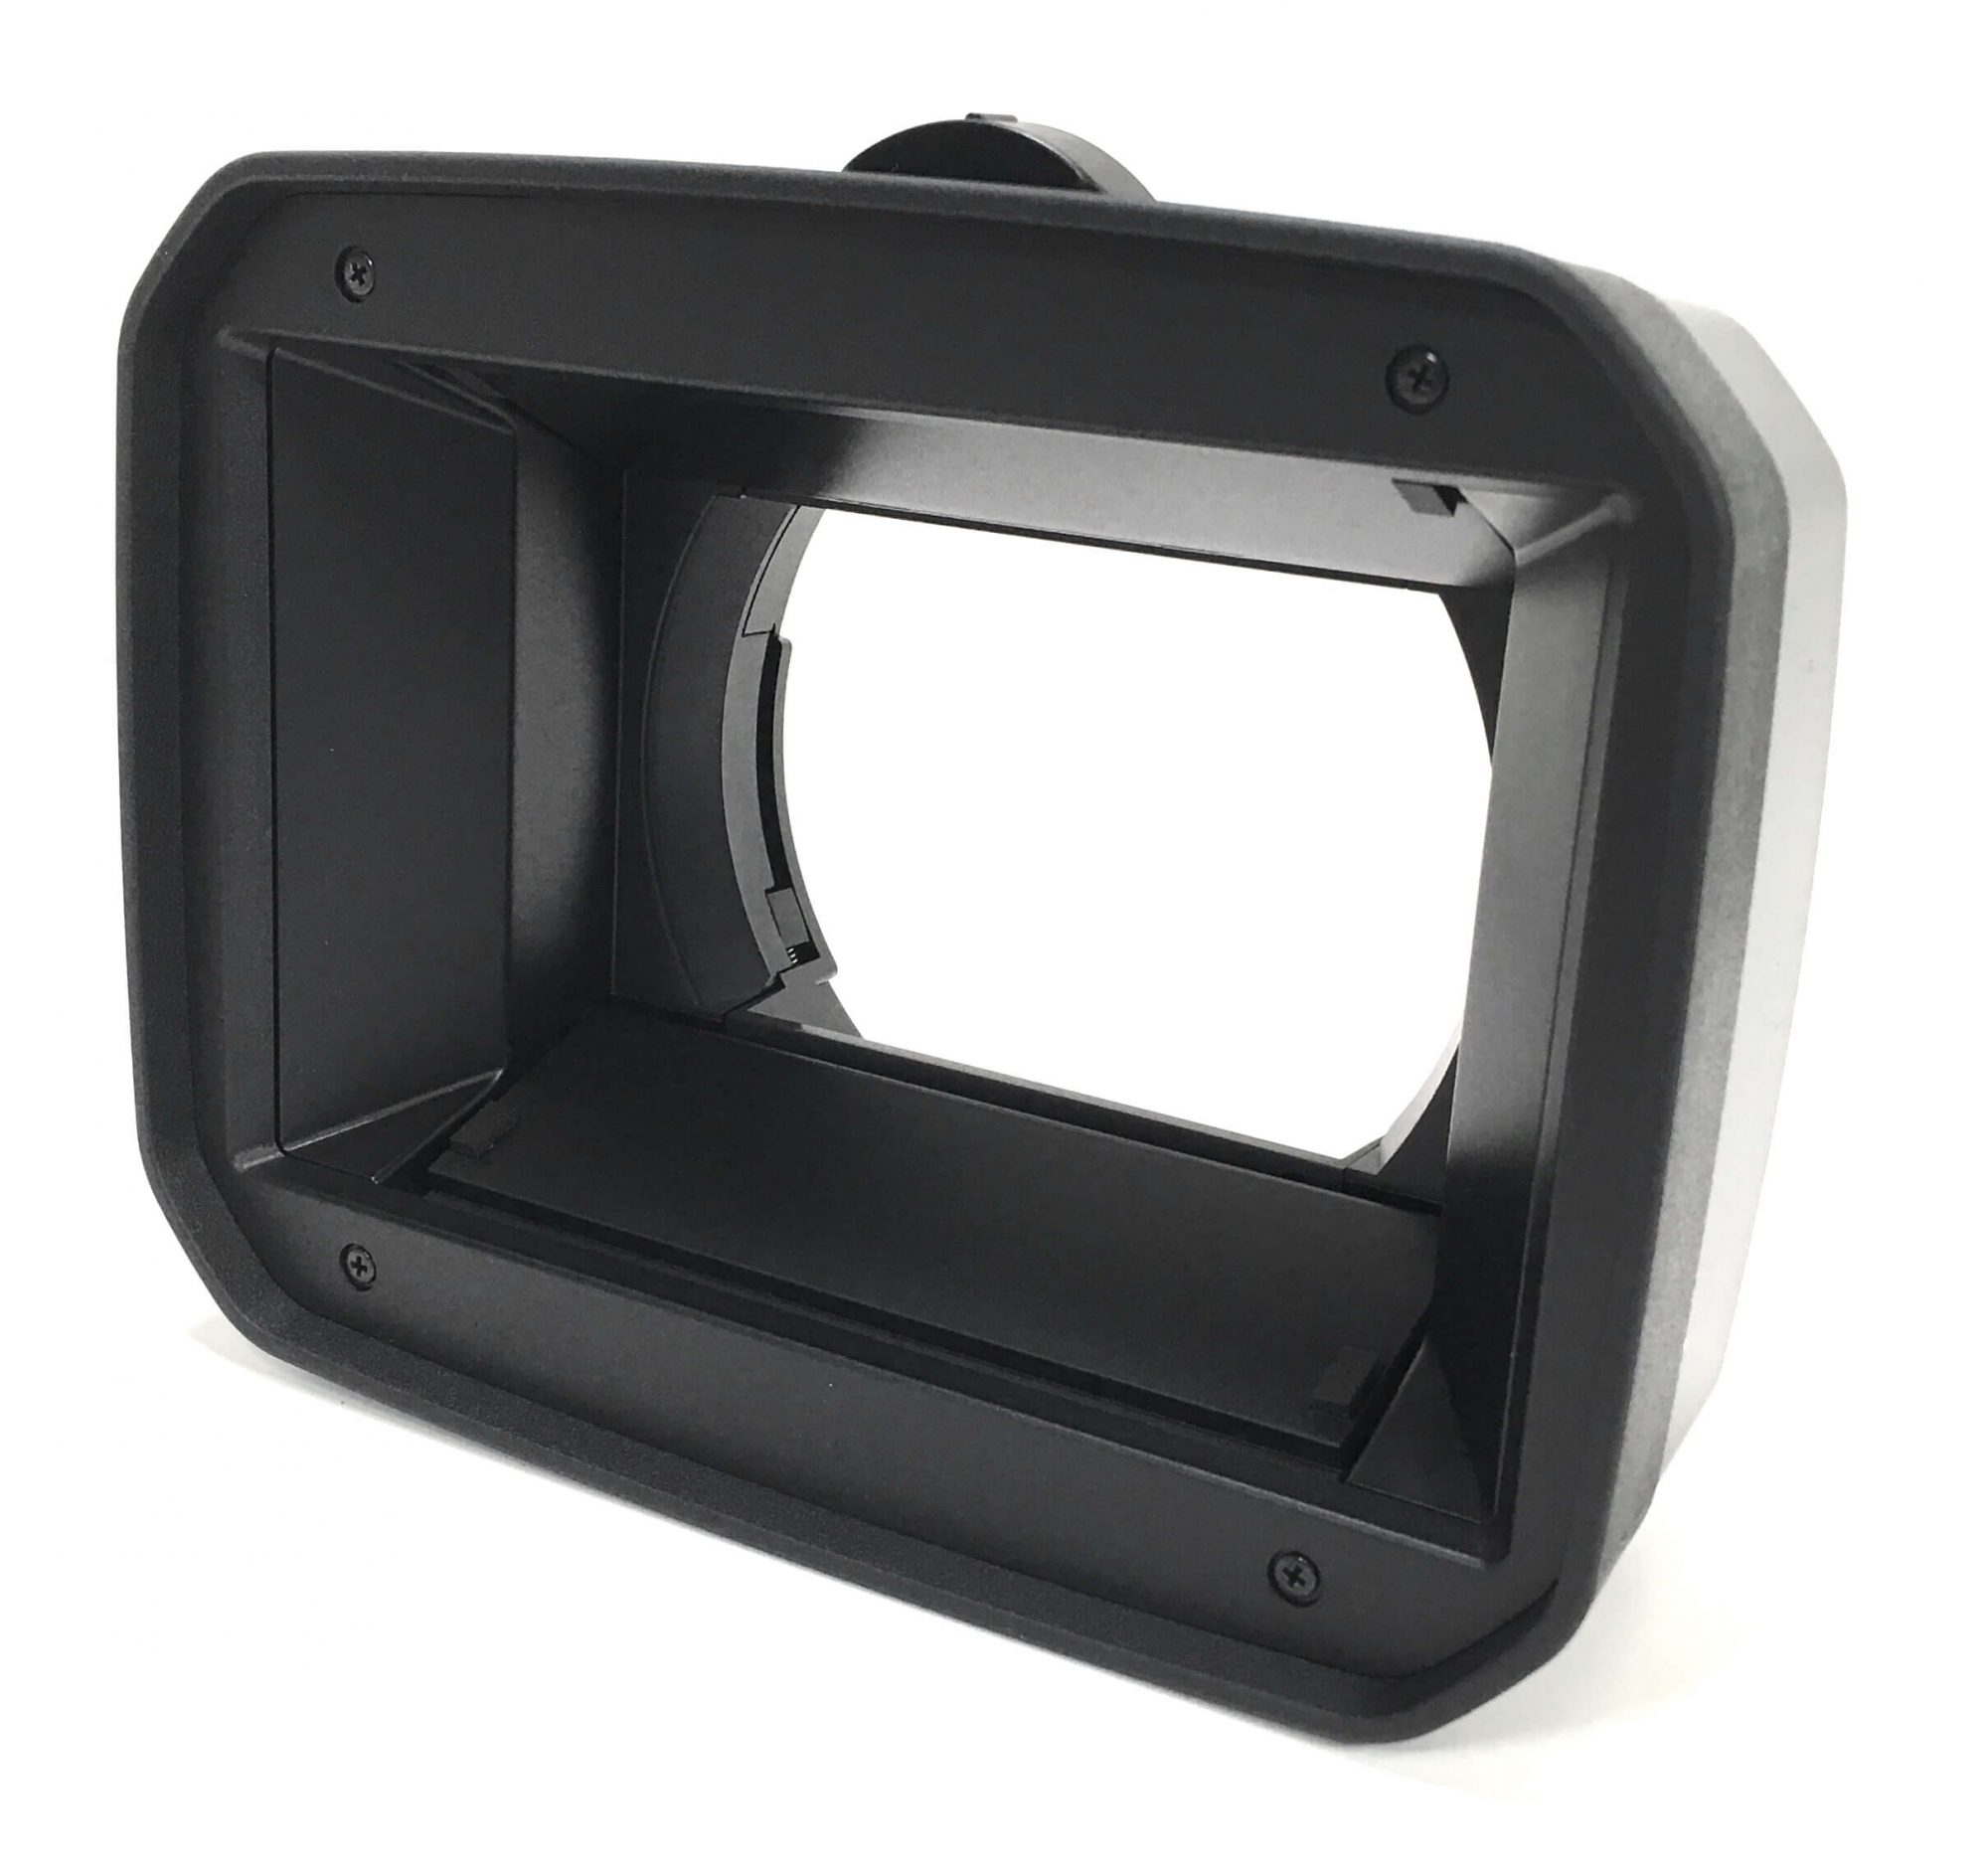 Original Lens Hood with Shutter for the Sony HXR-NX100 camcorder. It is a genuine Sony part, sourced directly from Sony USA. Brand new factory fresh. Free Shipping.